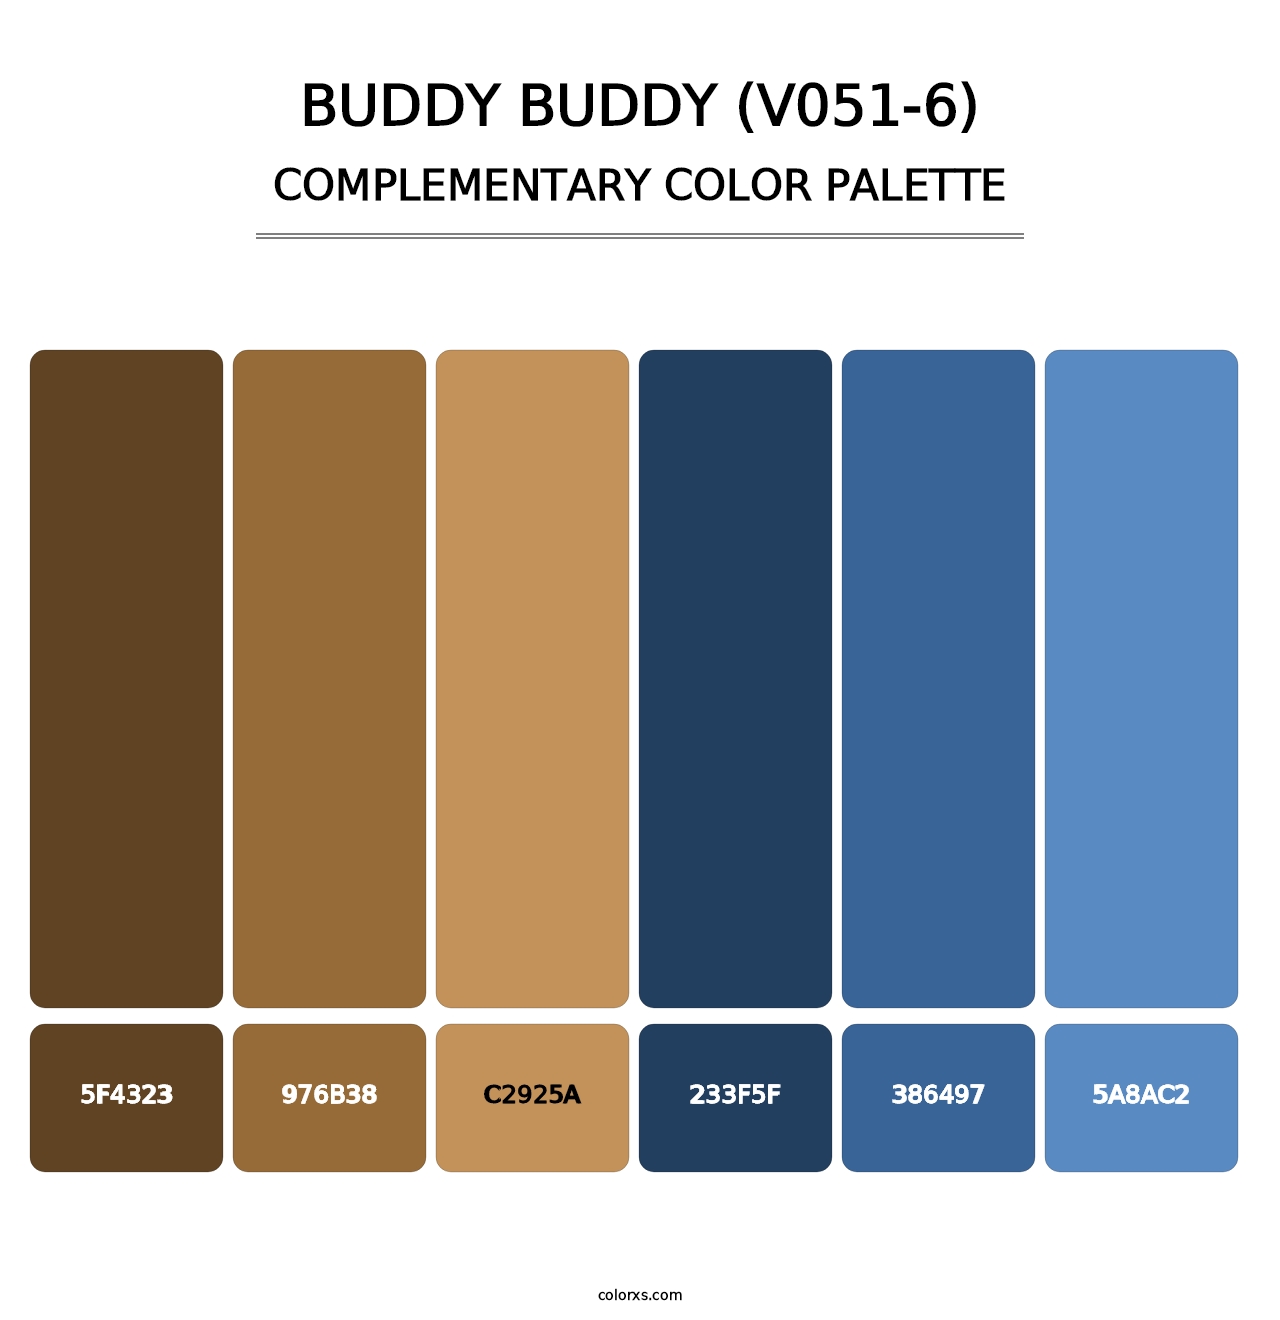 Buddy Buddy (V051-6) - Complementary Color Palette